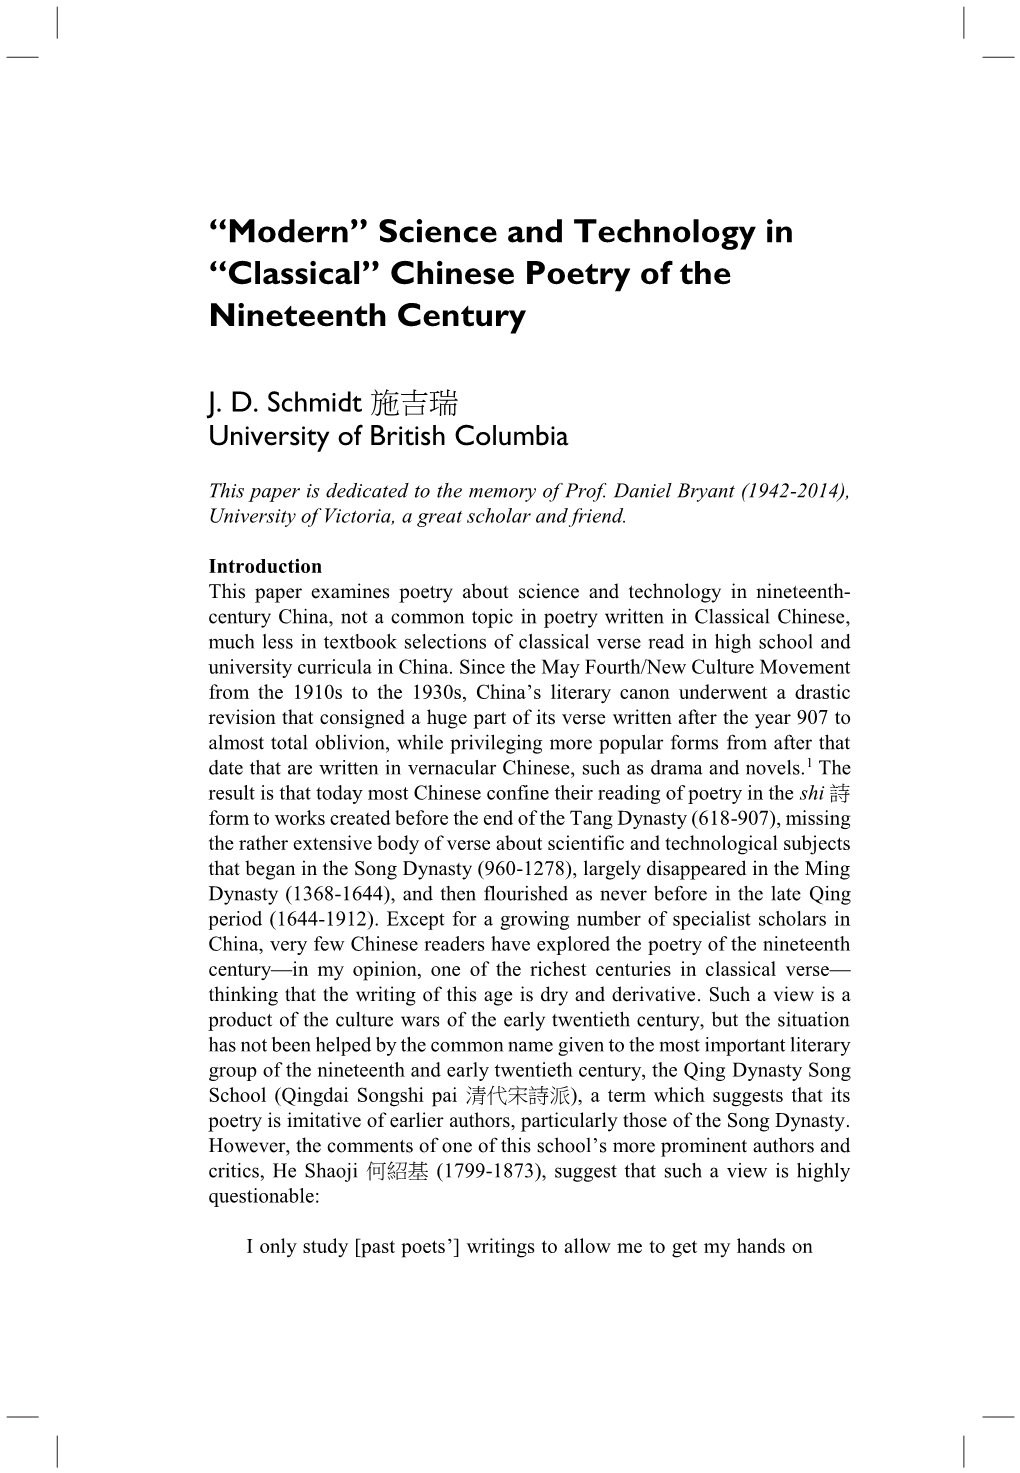 Chinese Poetry of the Nineteenth Century